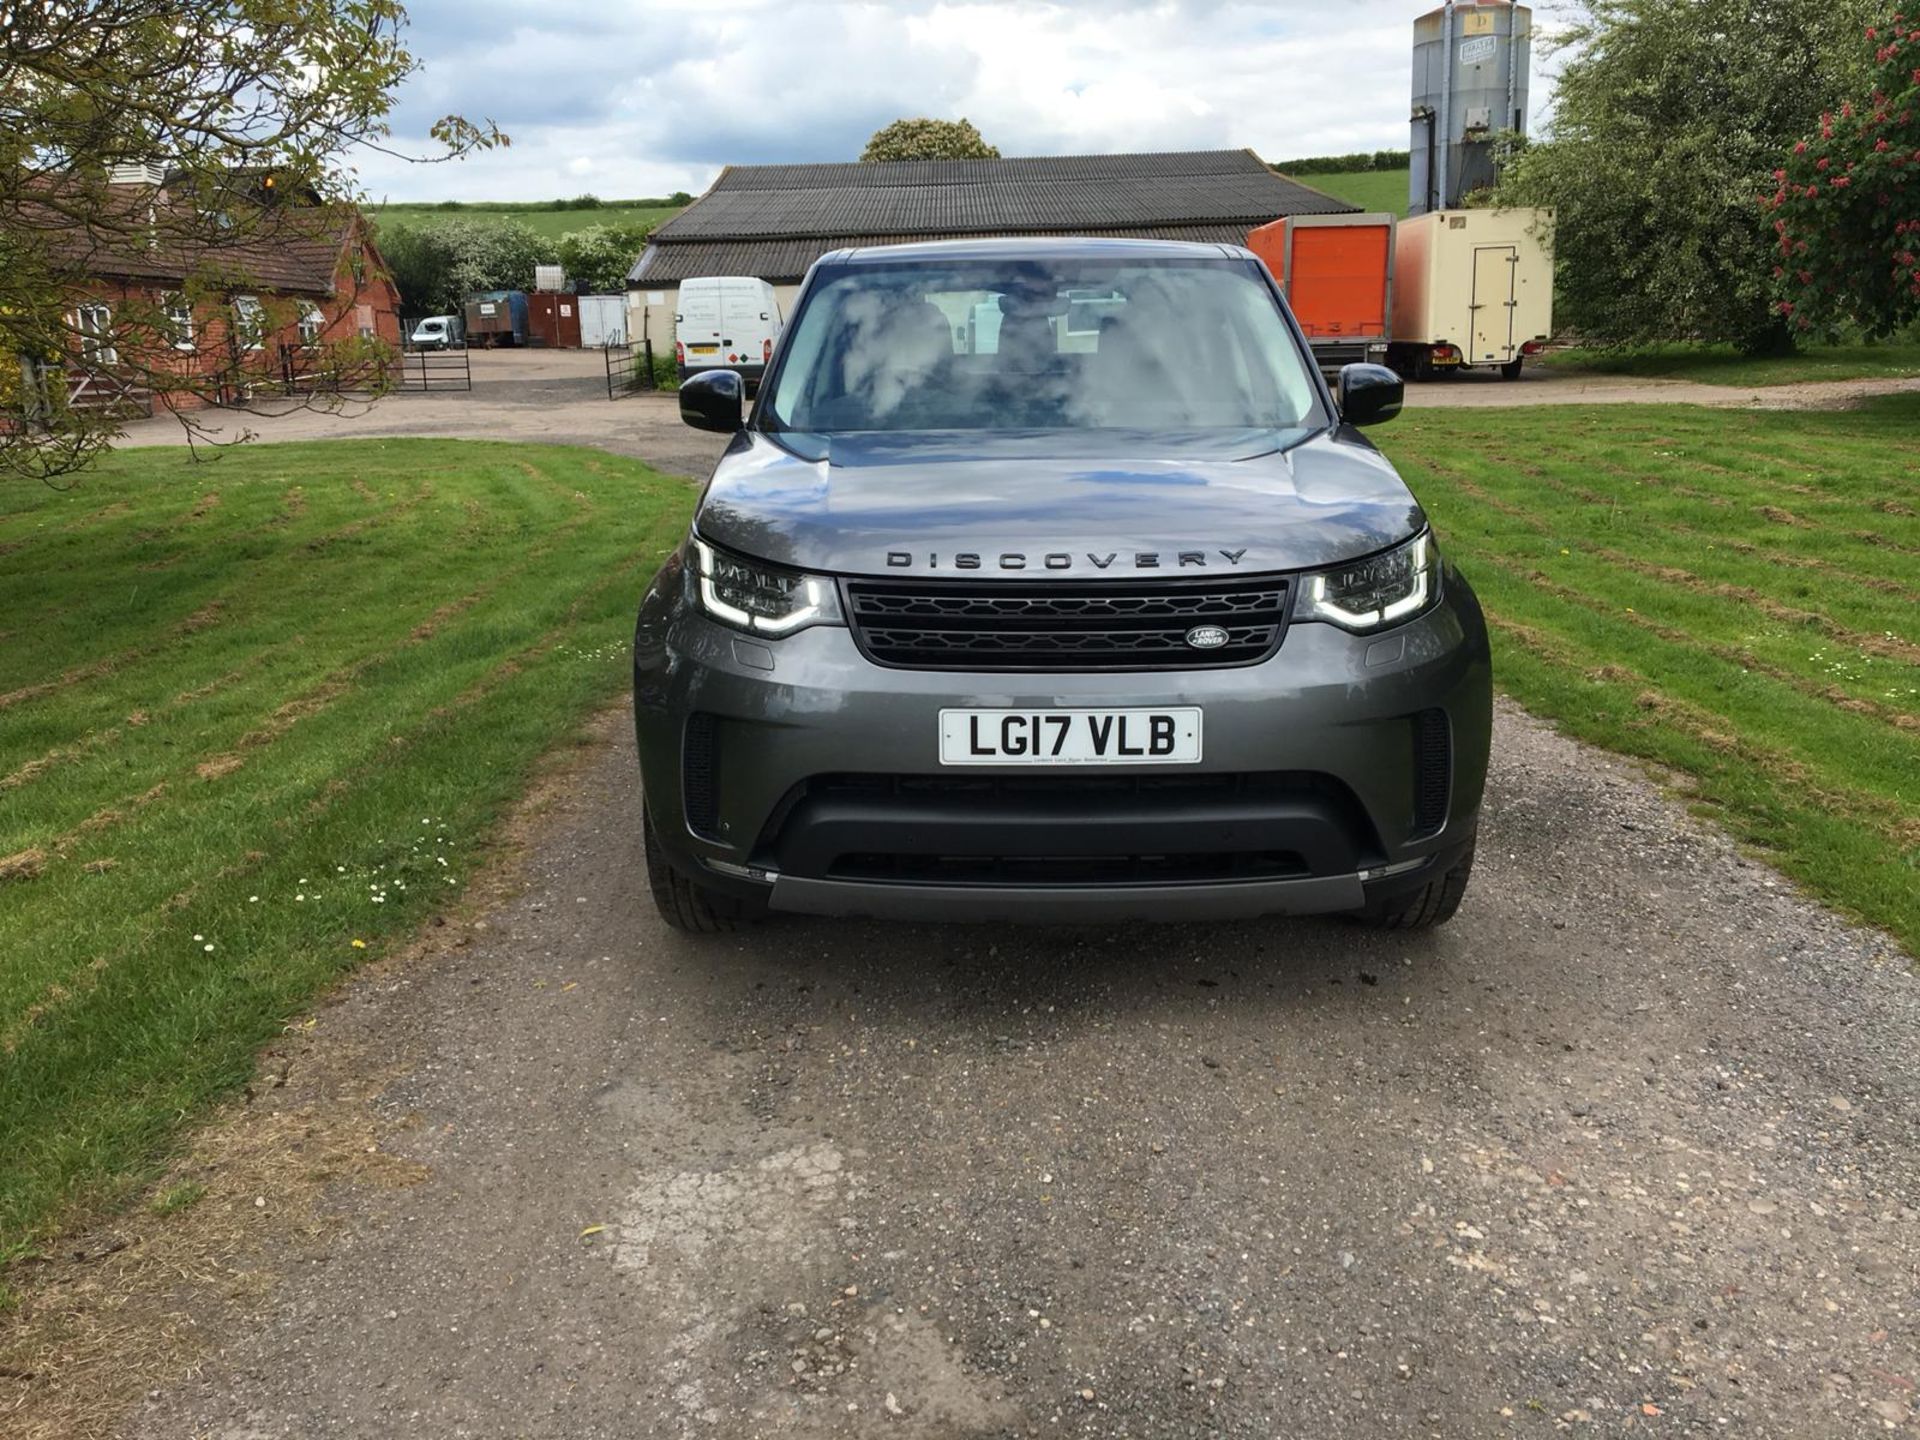 2017 REG LANDROVER DISCOVERY 5 TD6 HSE AUTO 2017 NEW SHAPE - Image 2 of 17